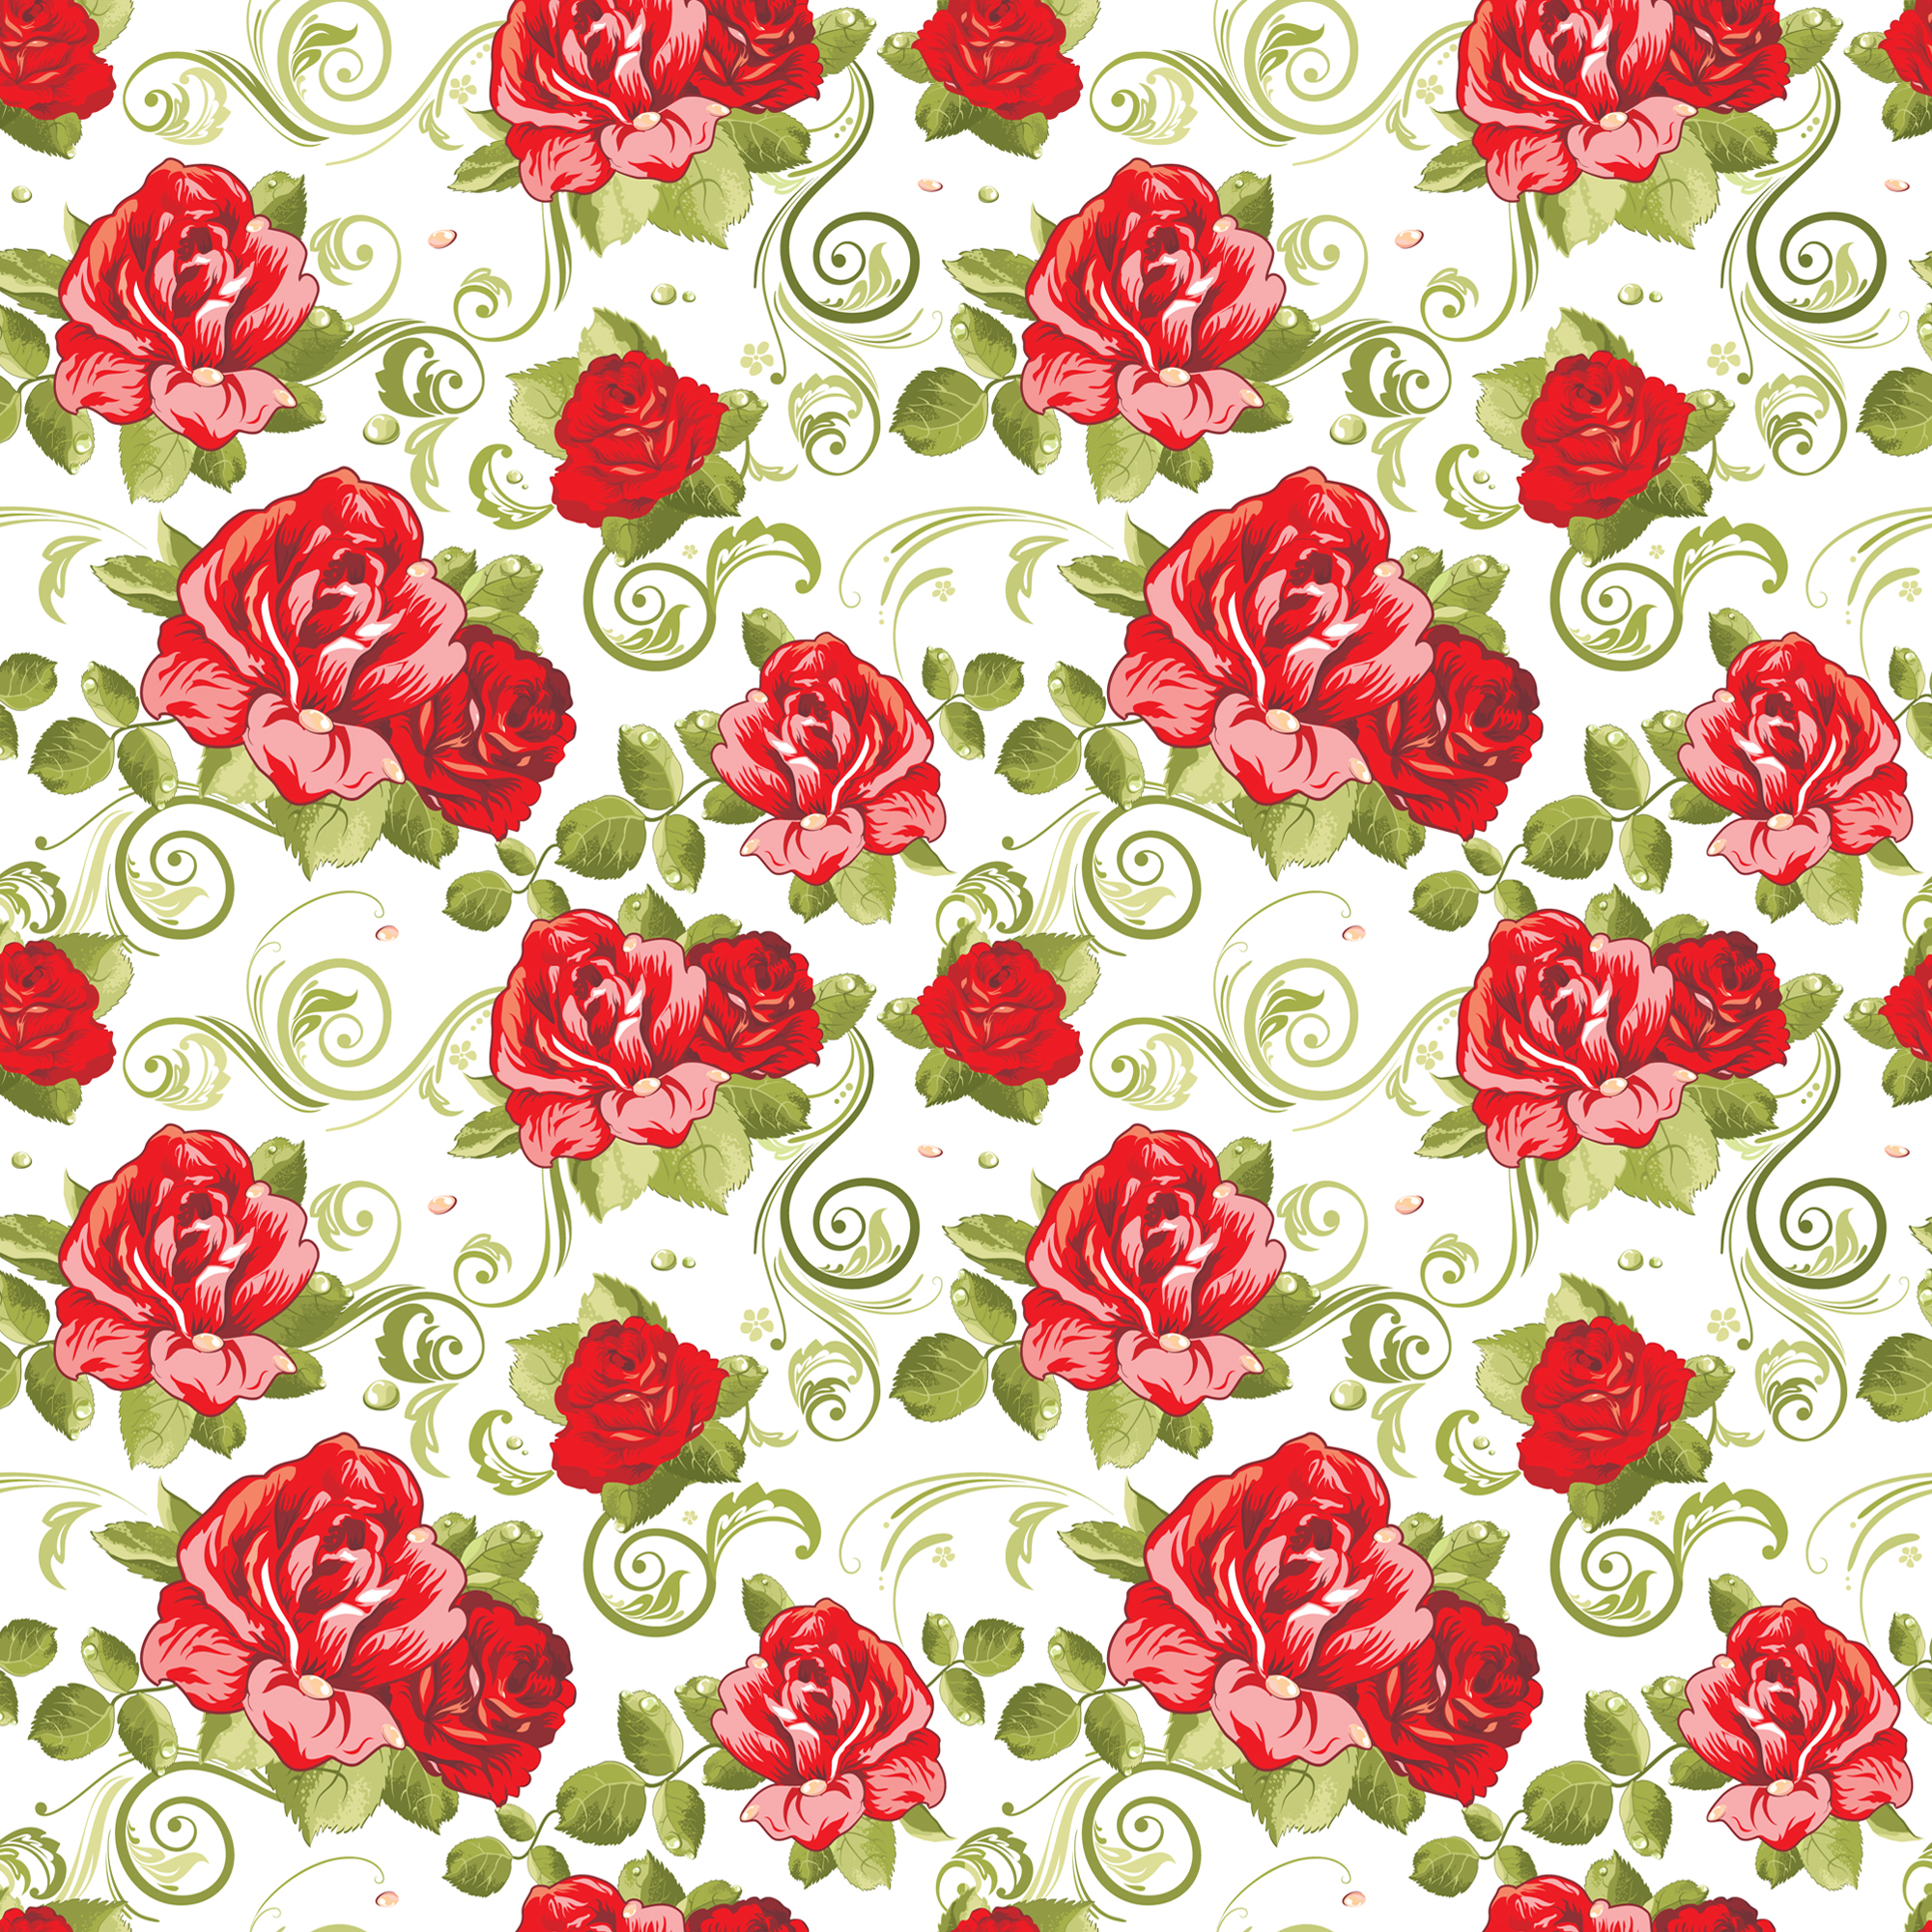 background, pictures, roses, flowers, patterns